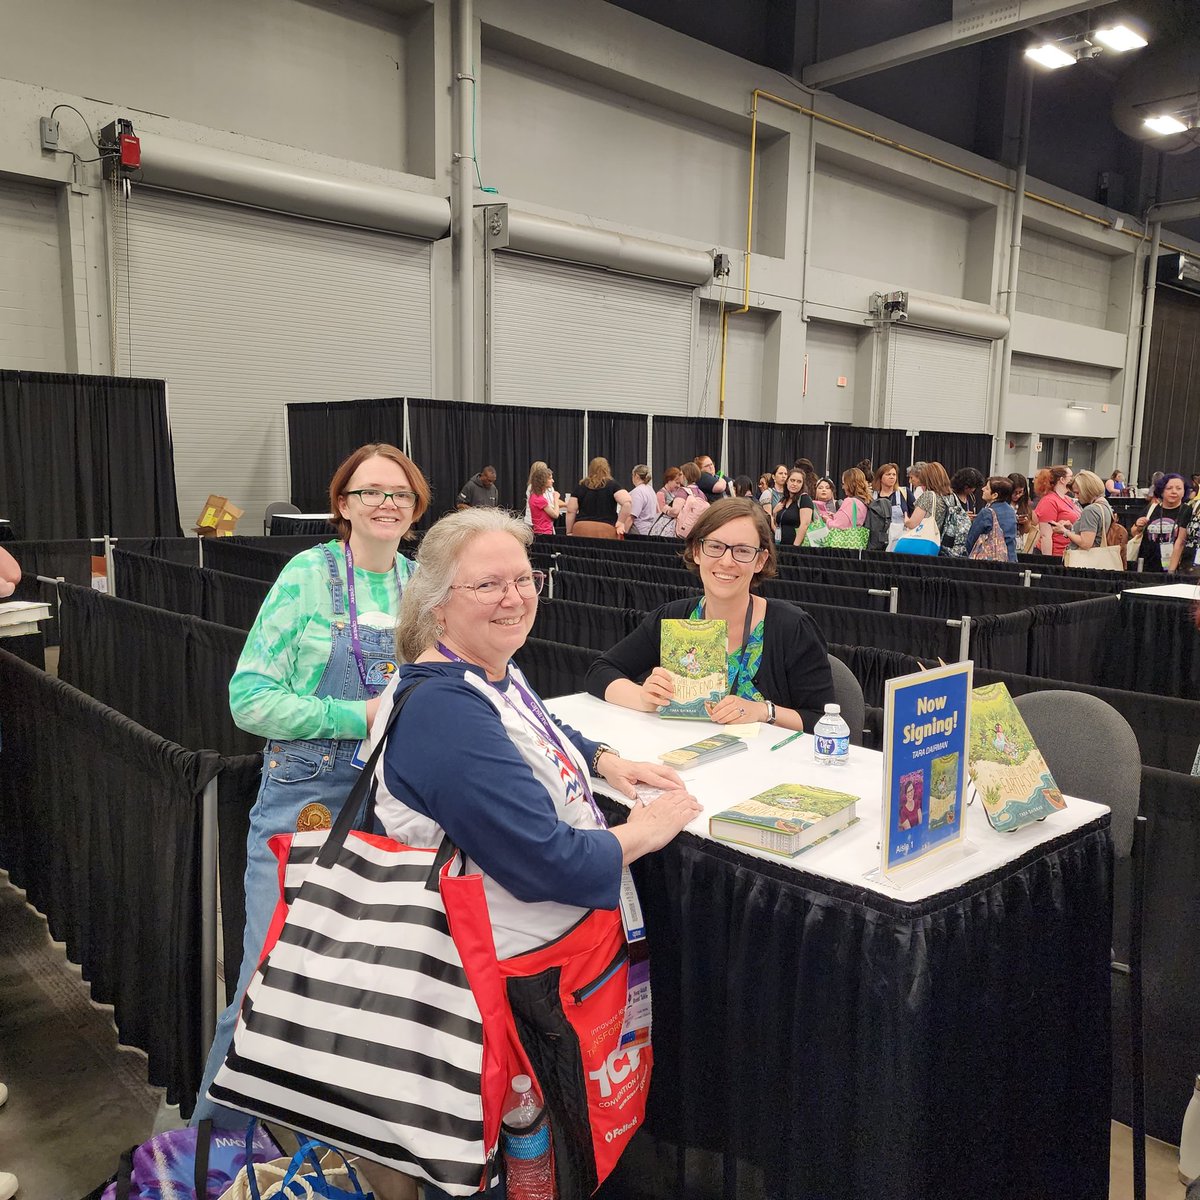 Fun to catch @TaraDairman at the end of her signing slot. She had a HUGE line earlier! THE GIRL AT EARTH'S END is a beautiful story w beautiful cover by one of our finest MG authors. #txla23 #tla23